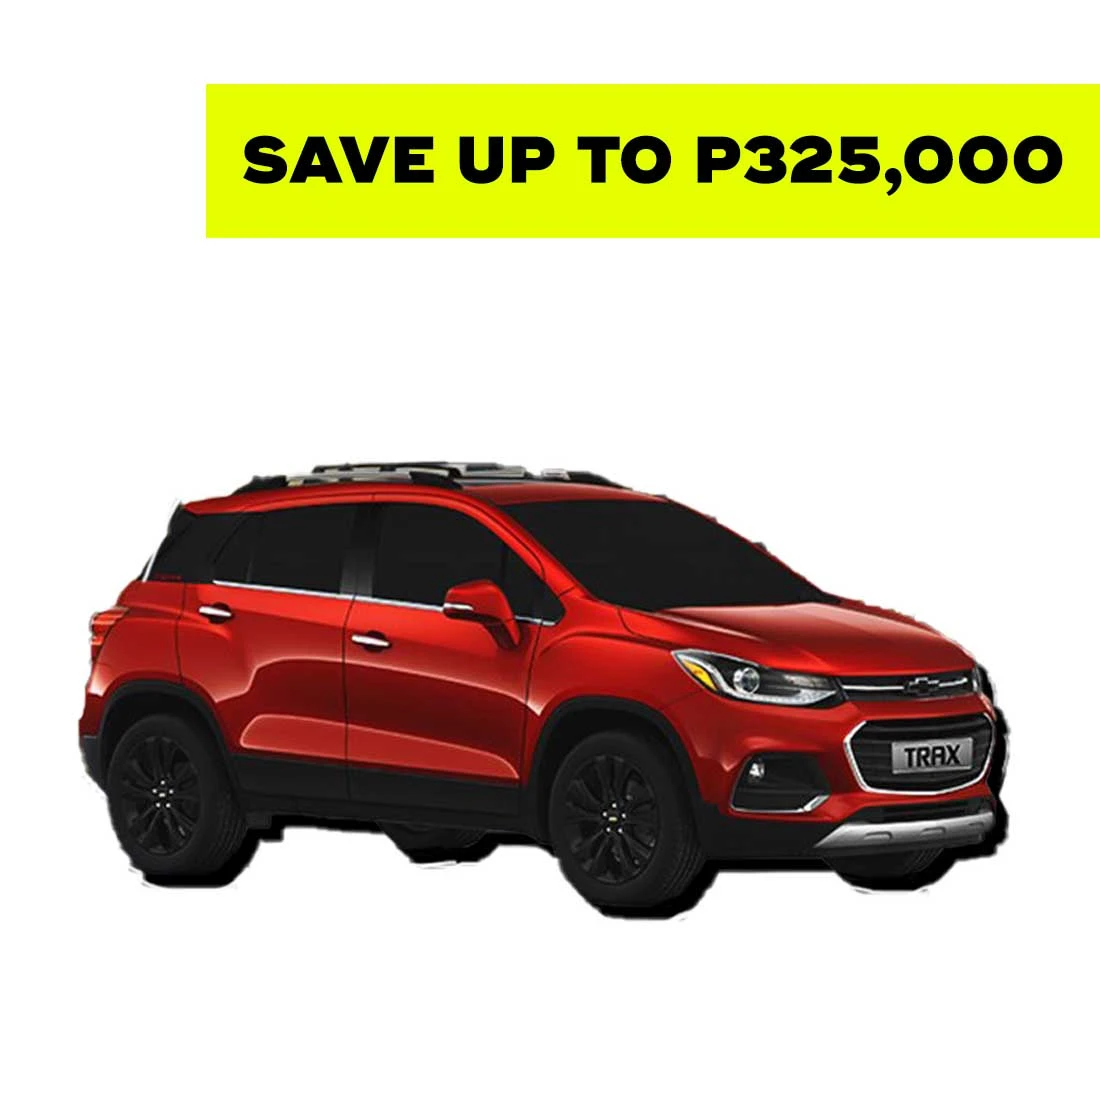 Own a car for as low as P55,000 DP